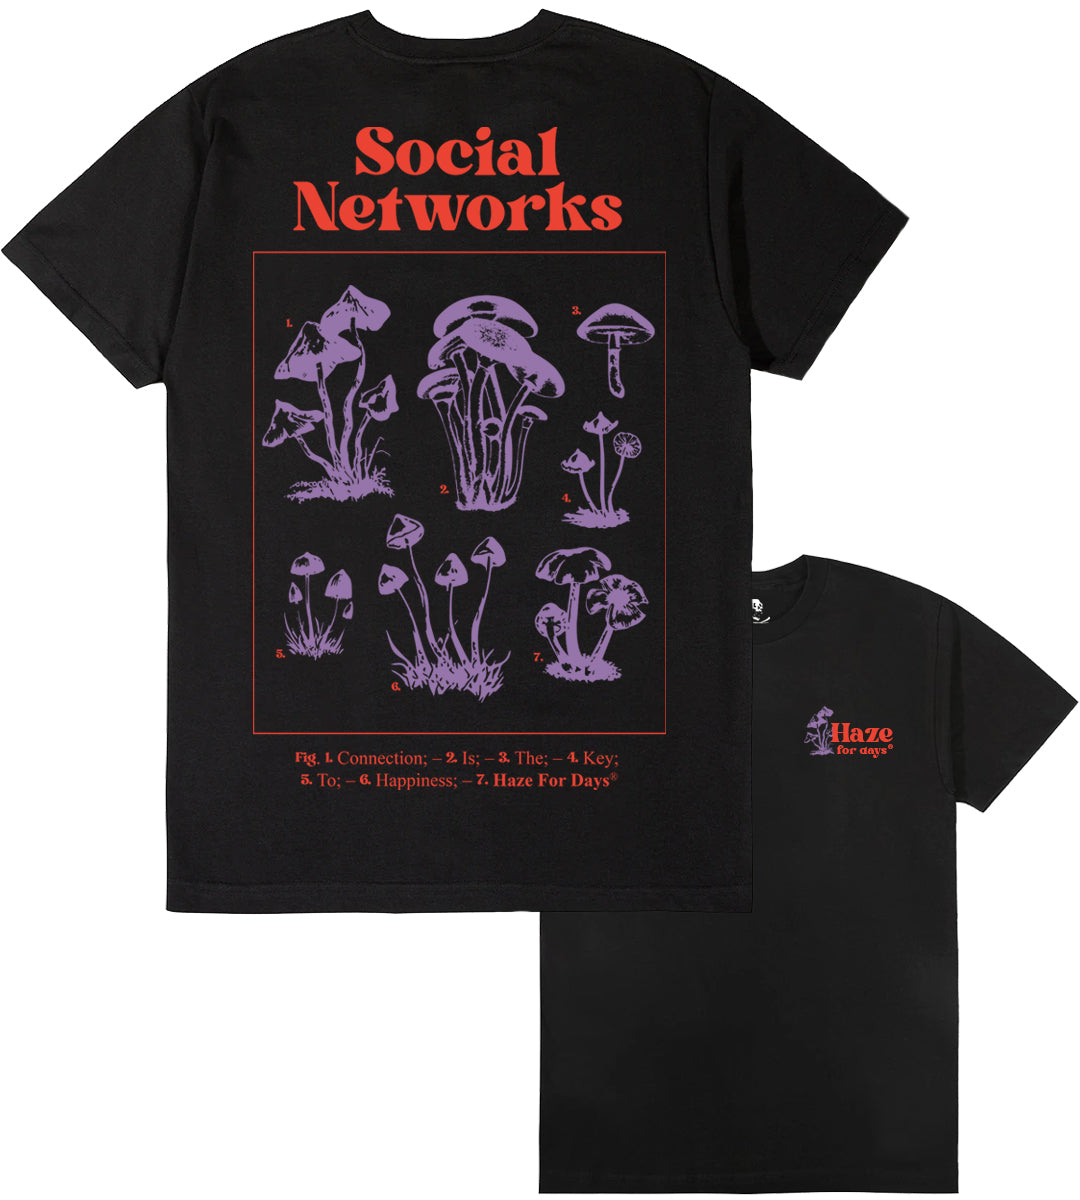 SOCIAL NETWORKS 900RX Electric Red (Black)